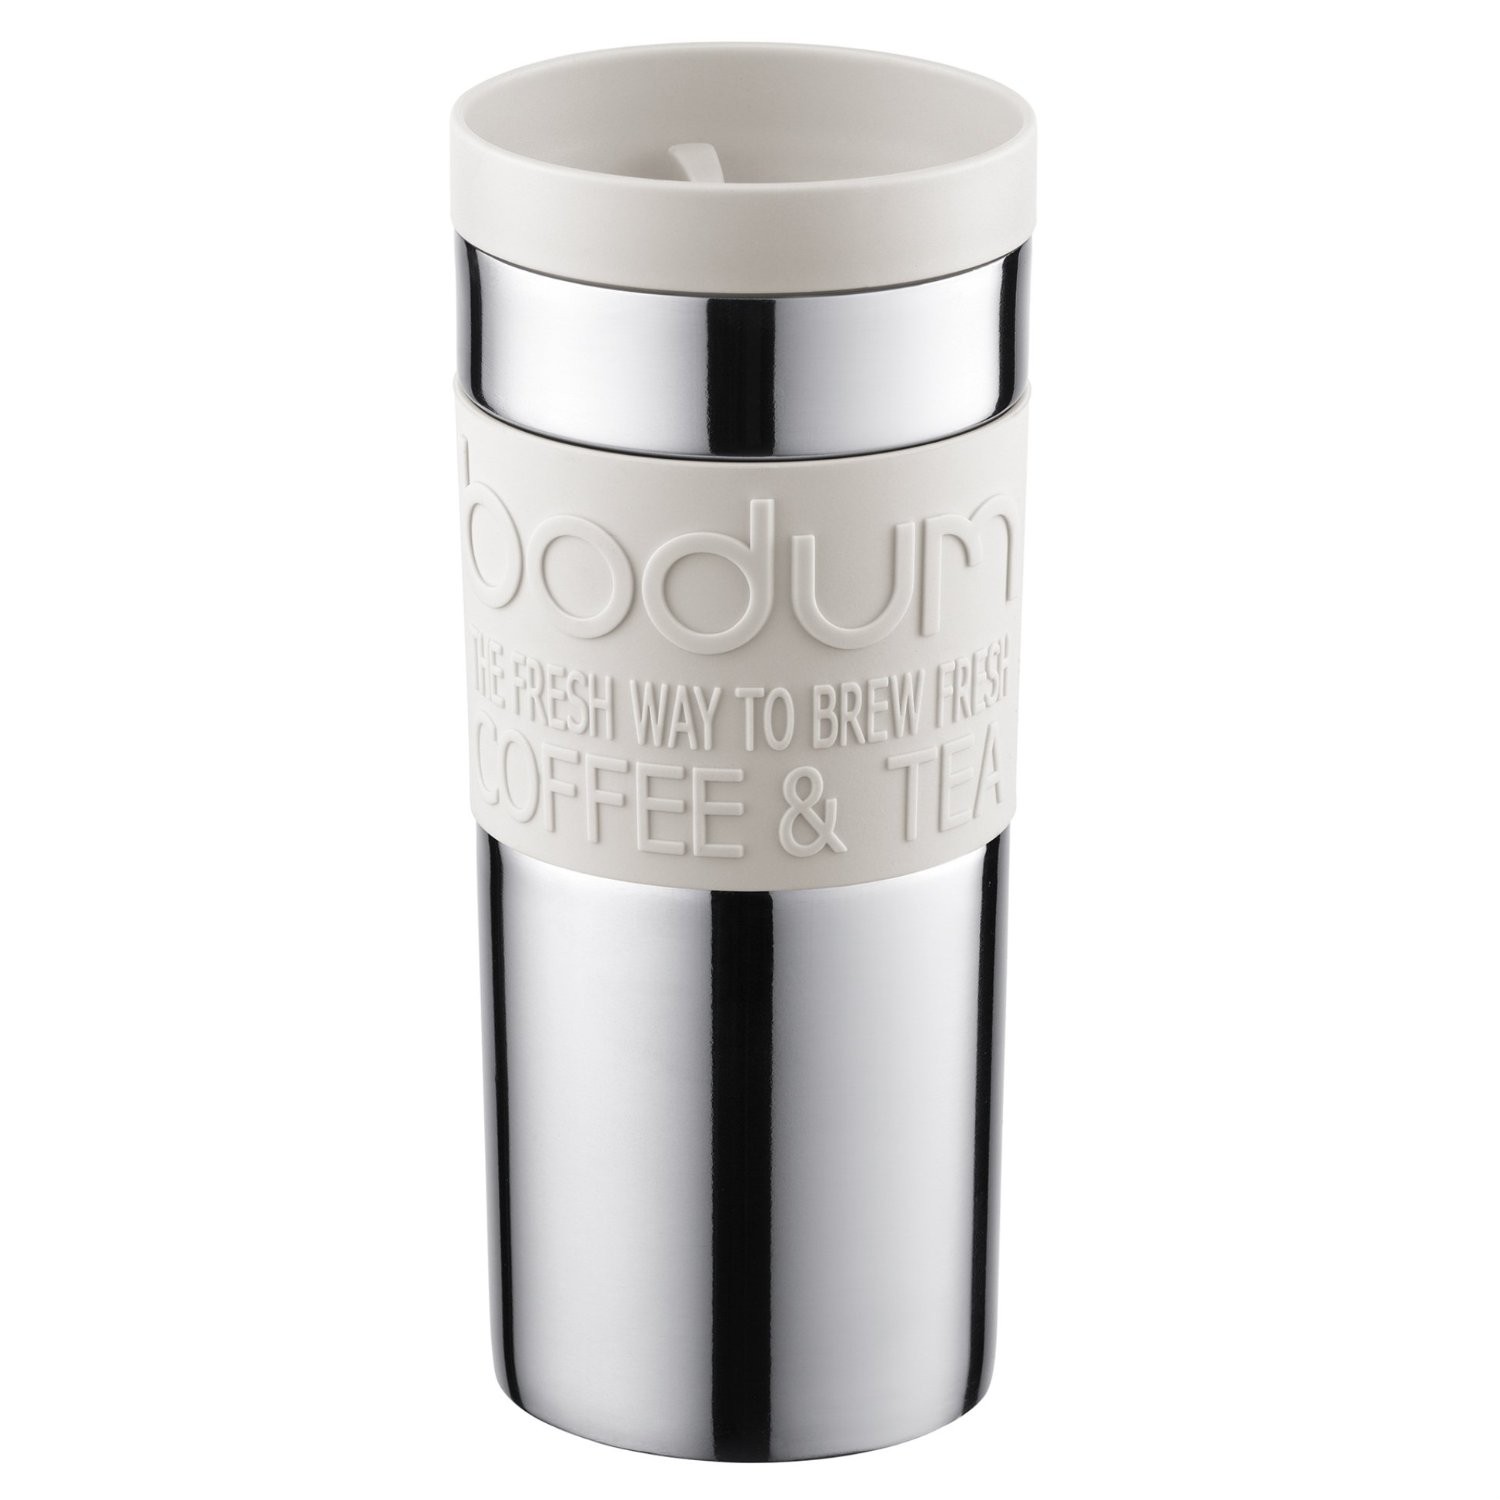 Travel mug double wall stainless steel 11.8oz / 35cl white creme